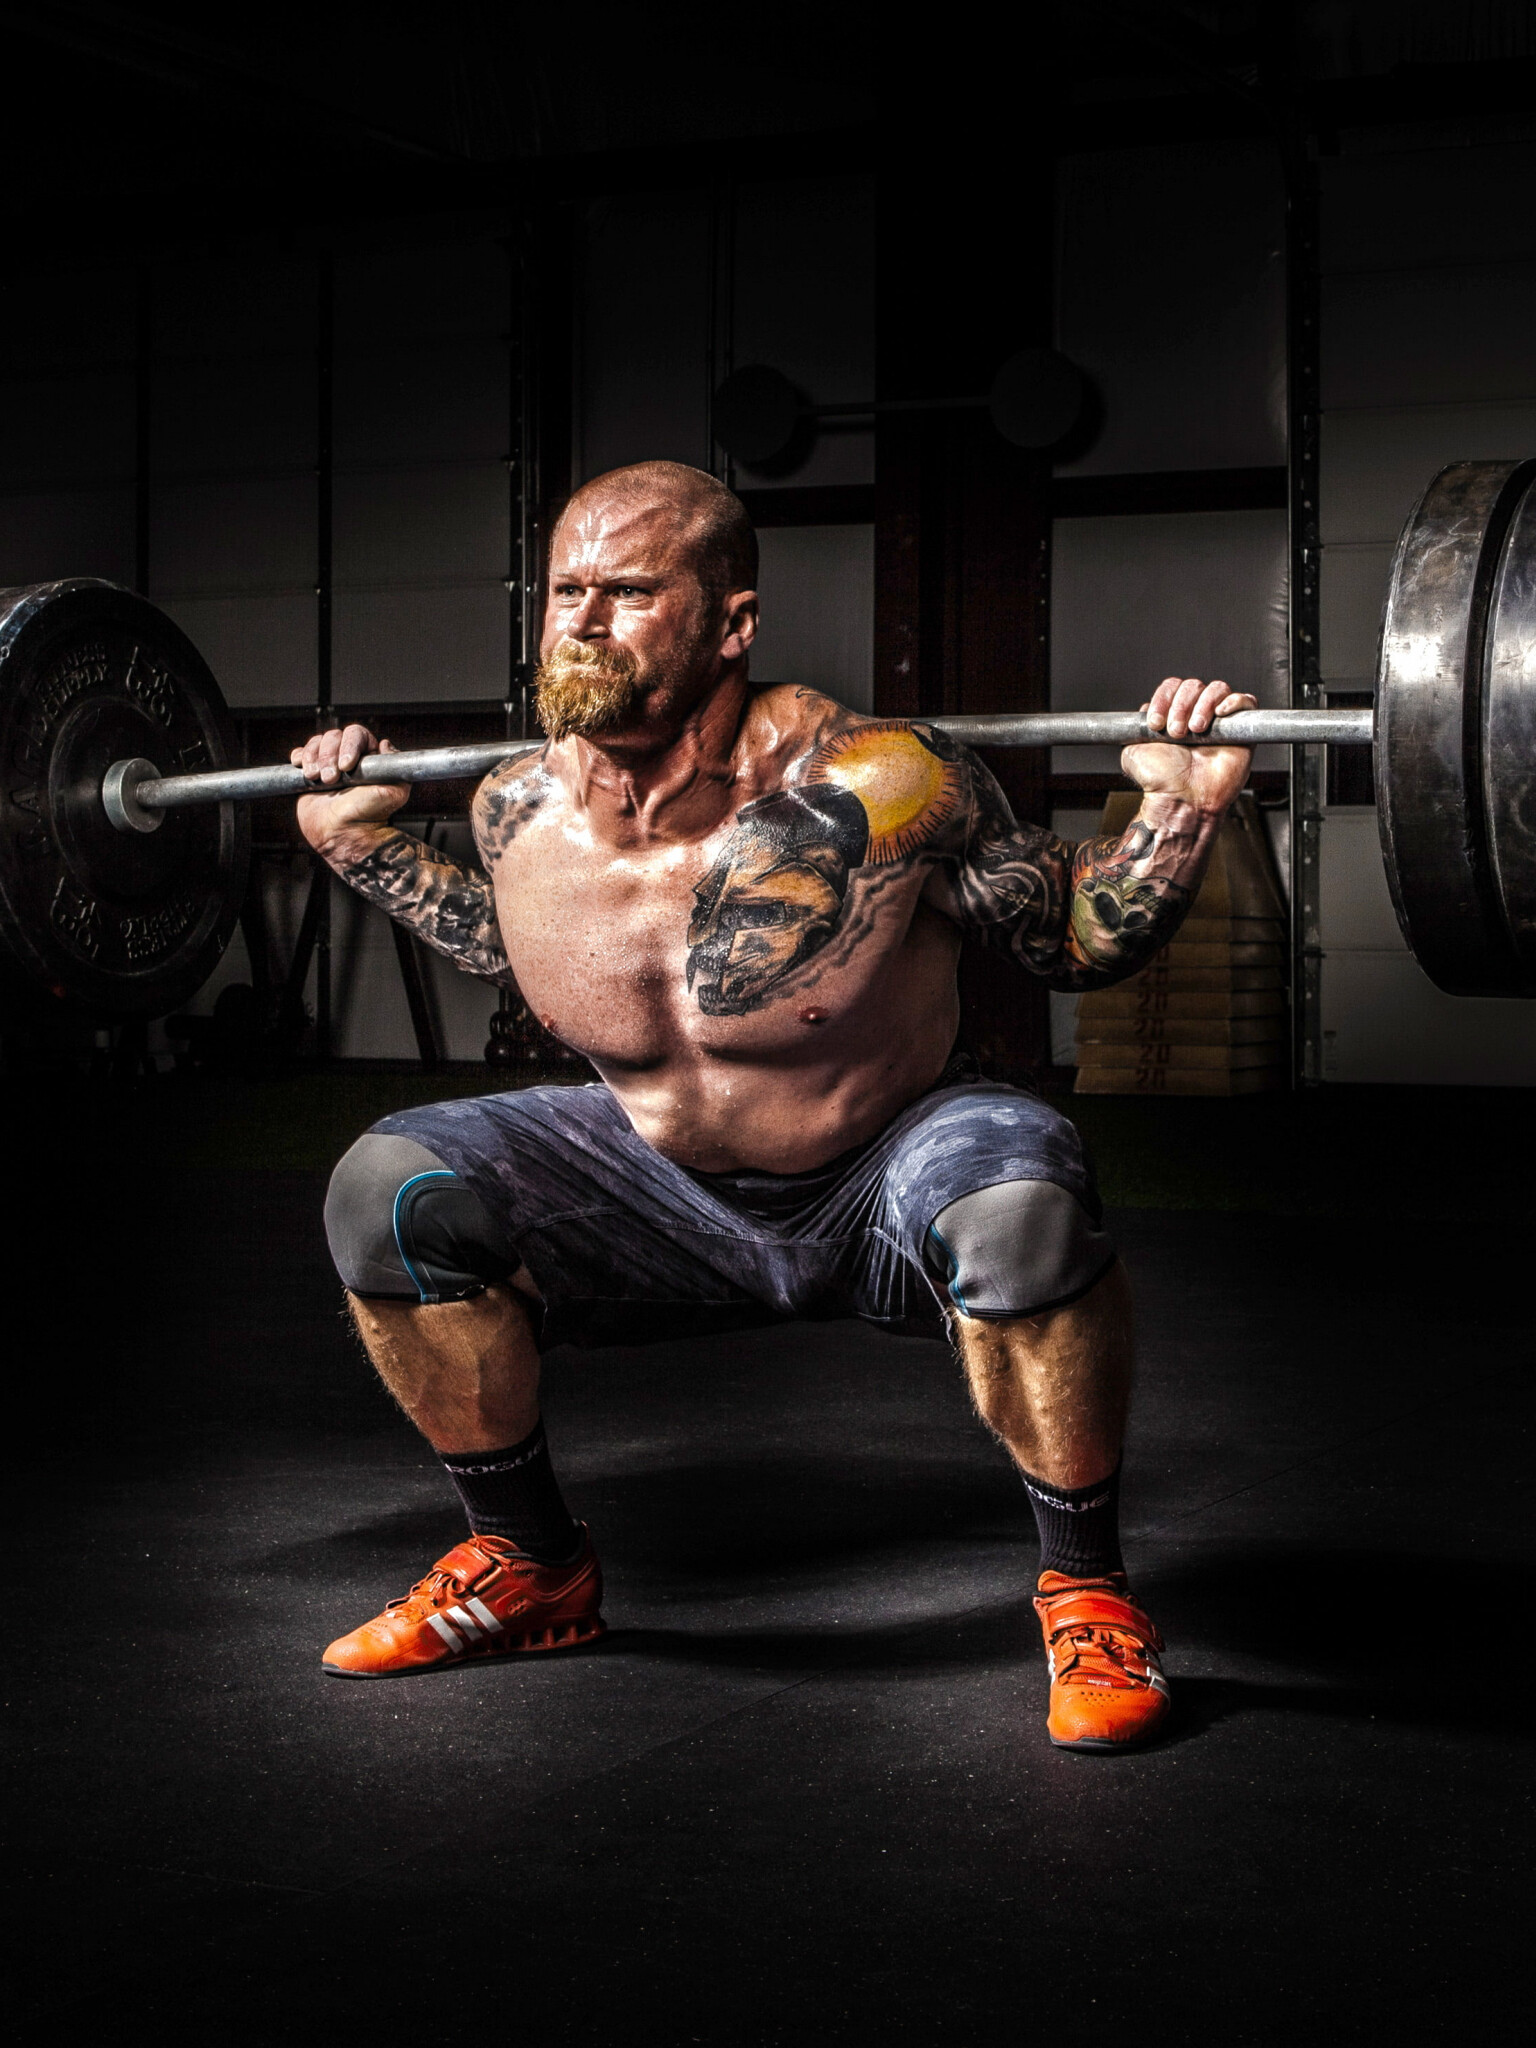 Powerlifting: A barbell loaded with weight plate, Strength athletics. 1540x2050 HD Wallpaper.